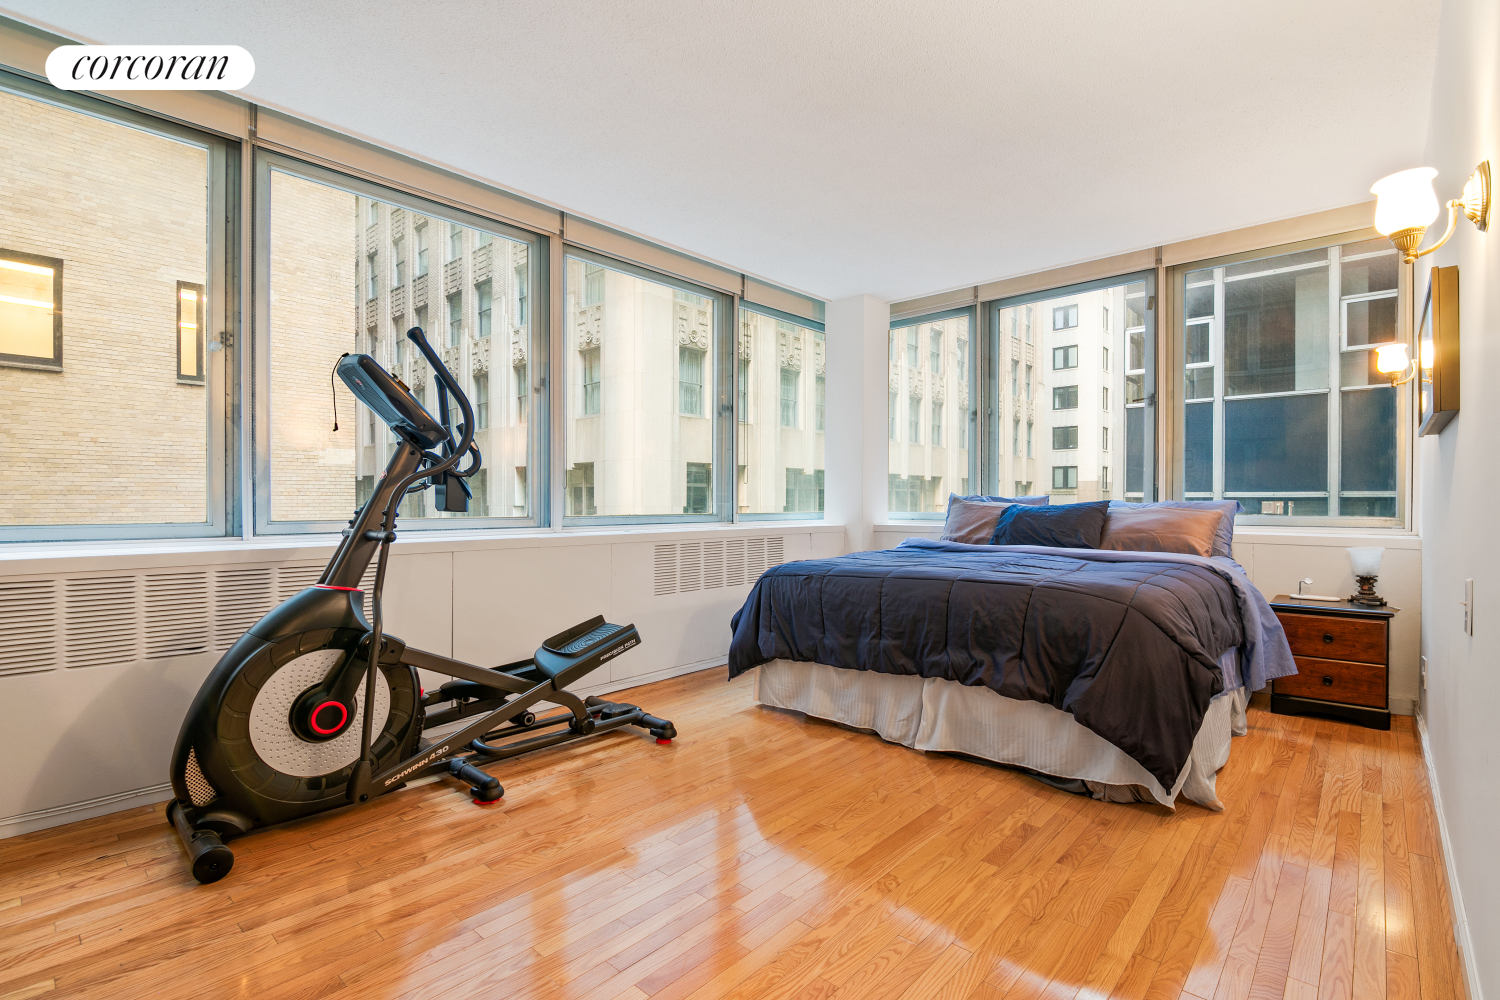 130 Water Street 3B, Financial District, Downtown, NYC - 2 Bedrooms  
2 Bathrooms  
5 Rooms - 